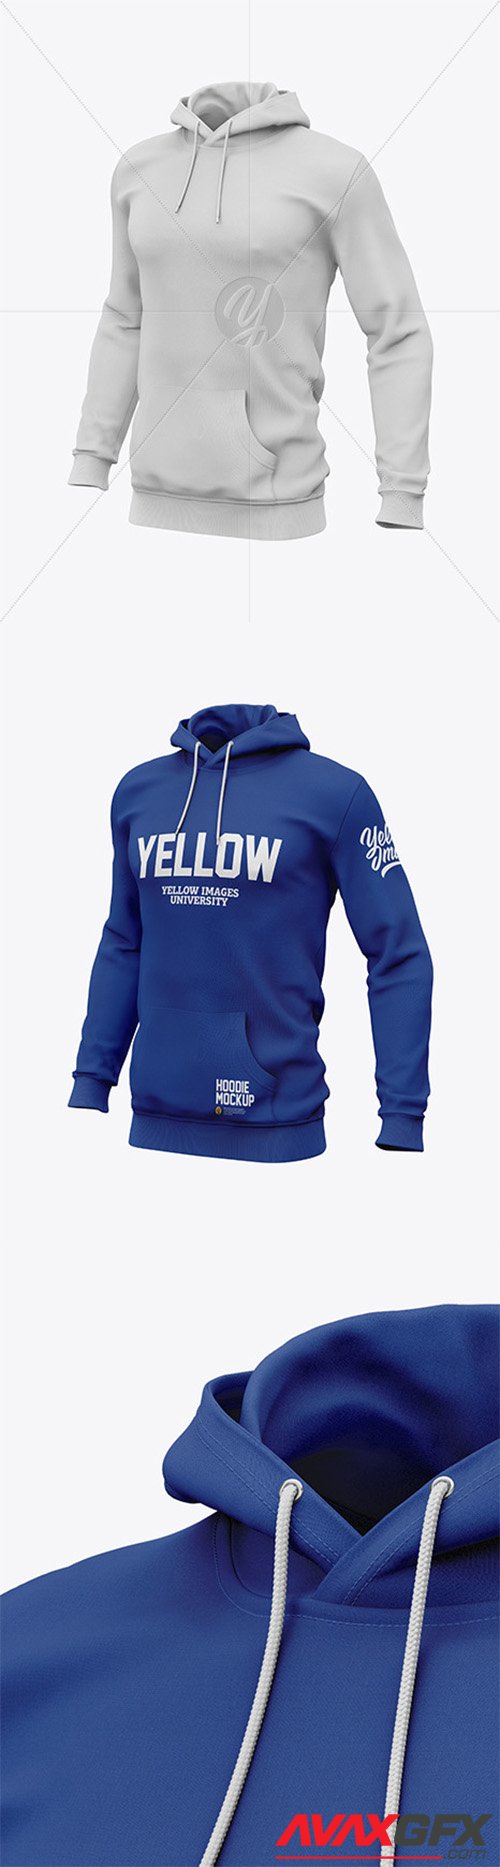 Download Men's Hoodie Mockup 51272 » AVAXGFX - All Downloads that ...